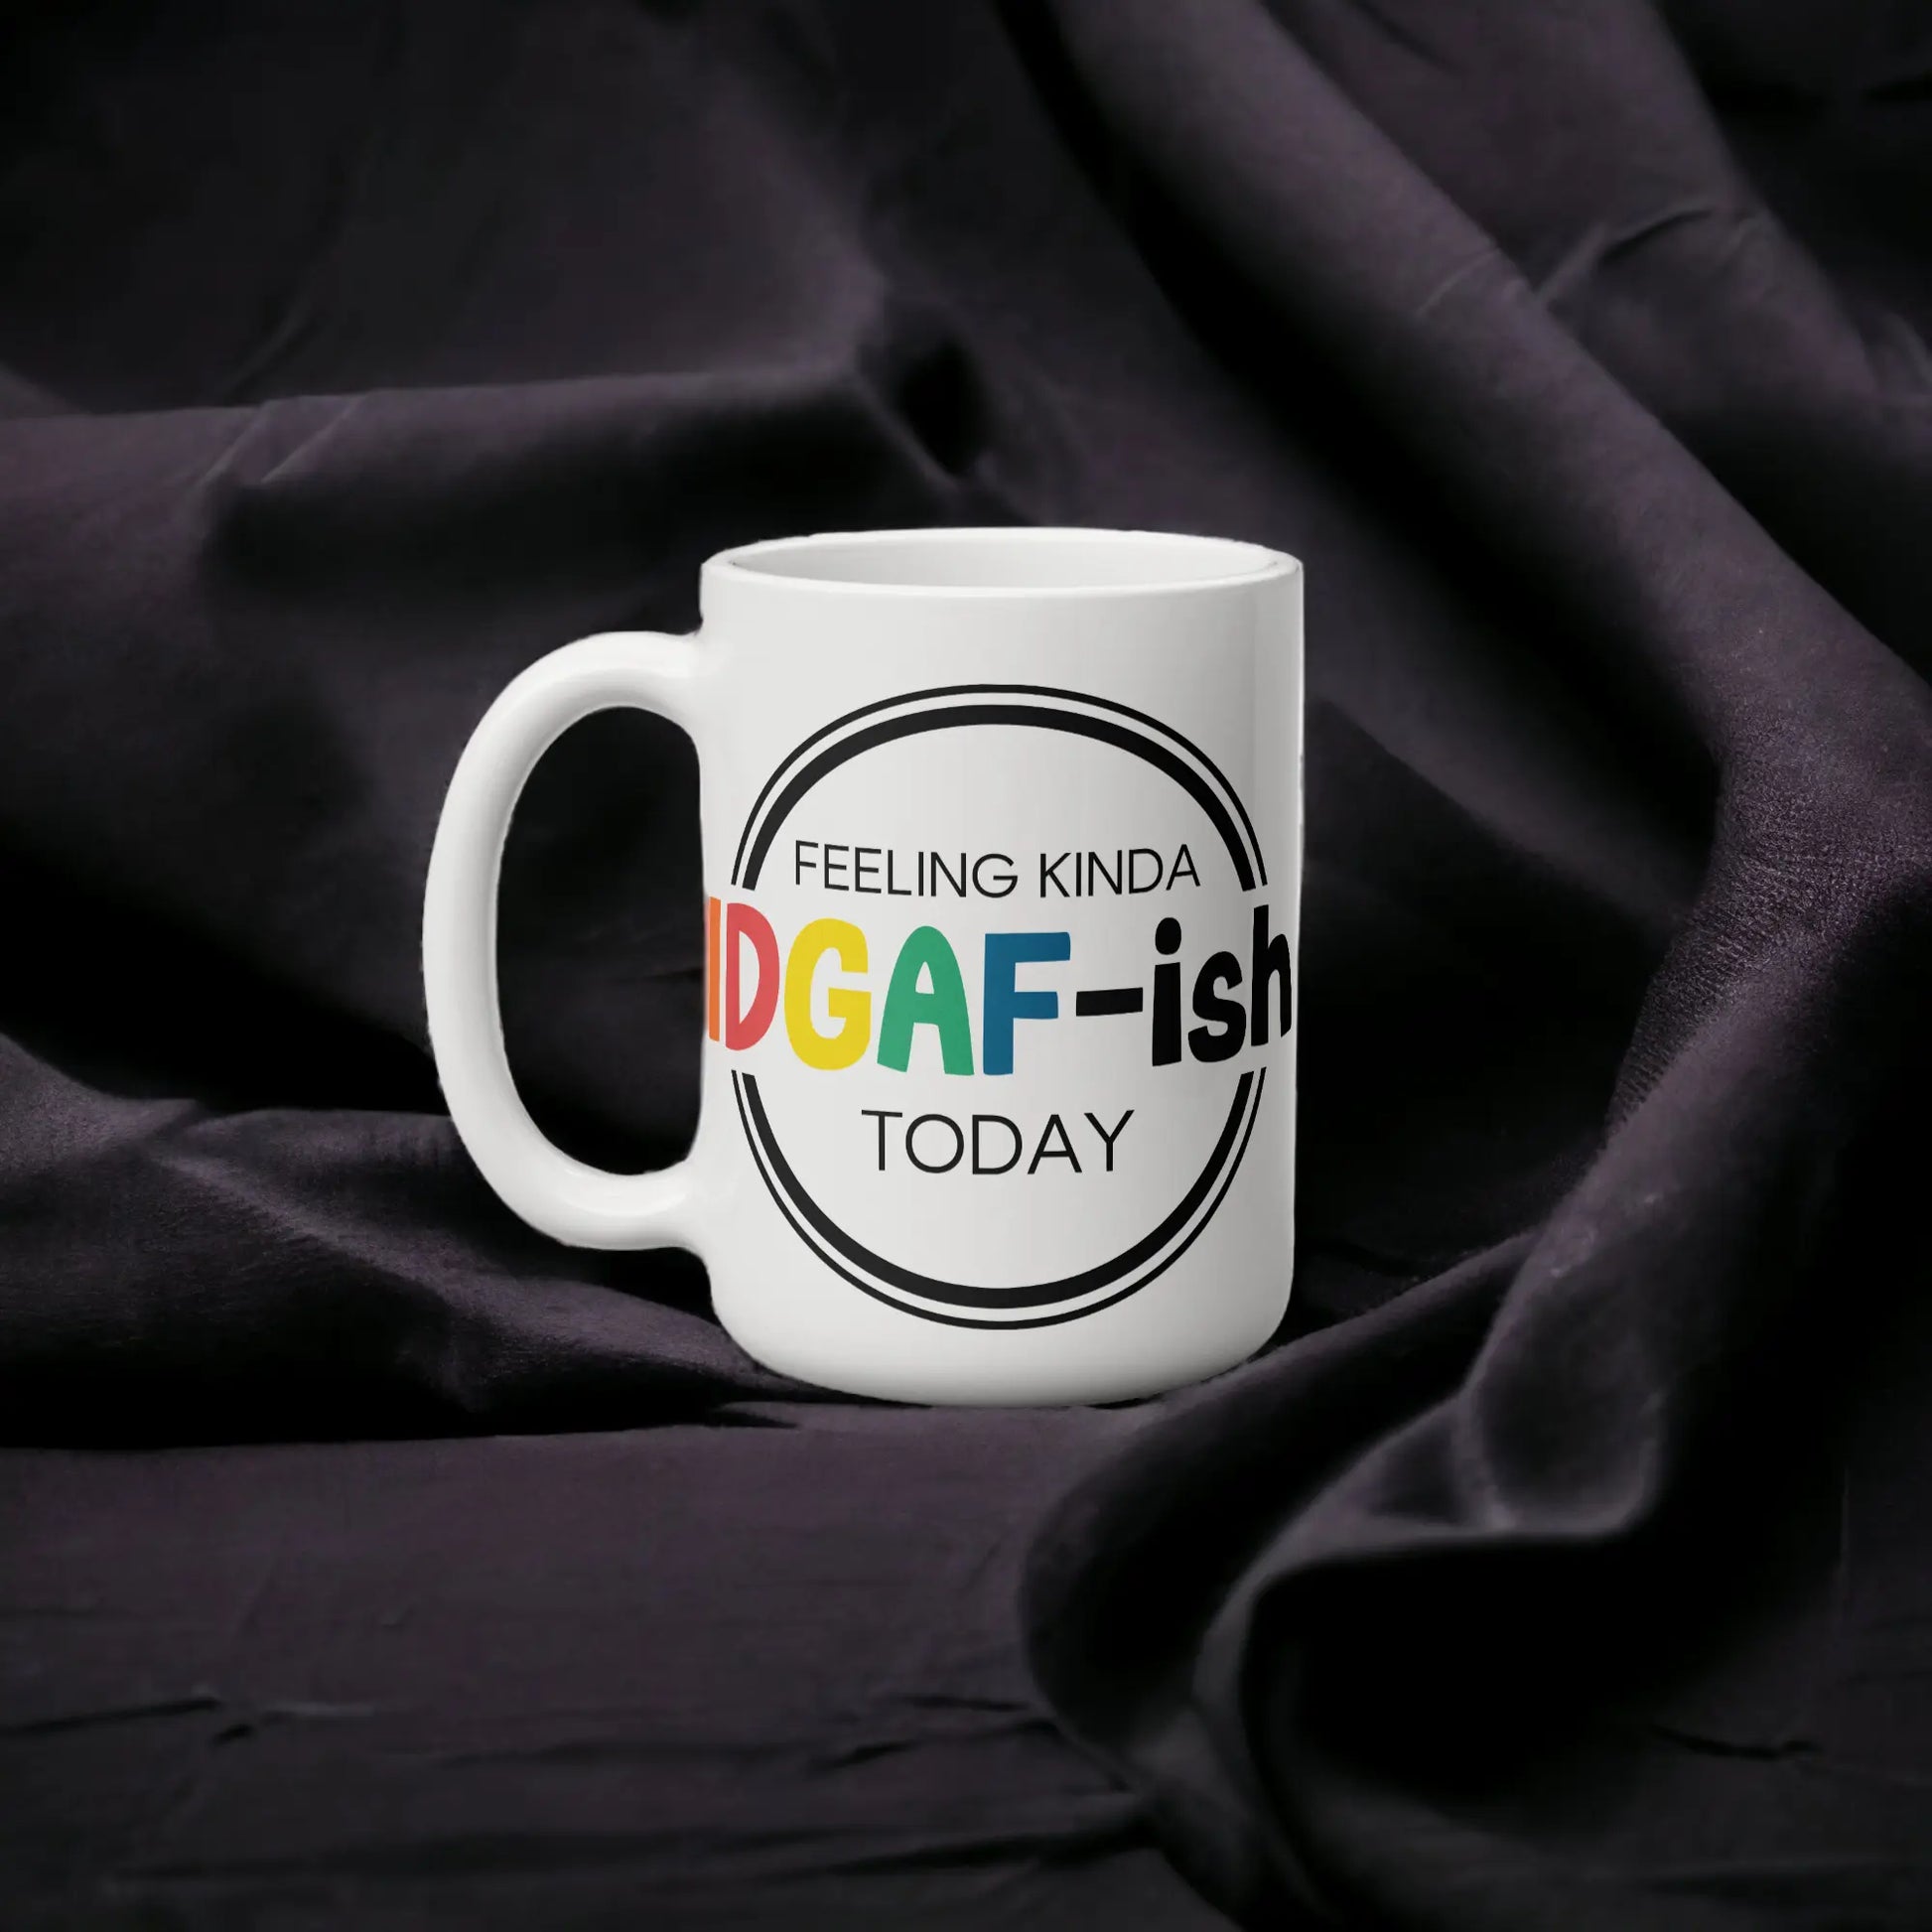  Feeling IDGAF-ish Today: Unapologetically Colorful Ceramic Mug with Free Shipping by Free Spirit Accessories sold by Free Spirit Accessories